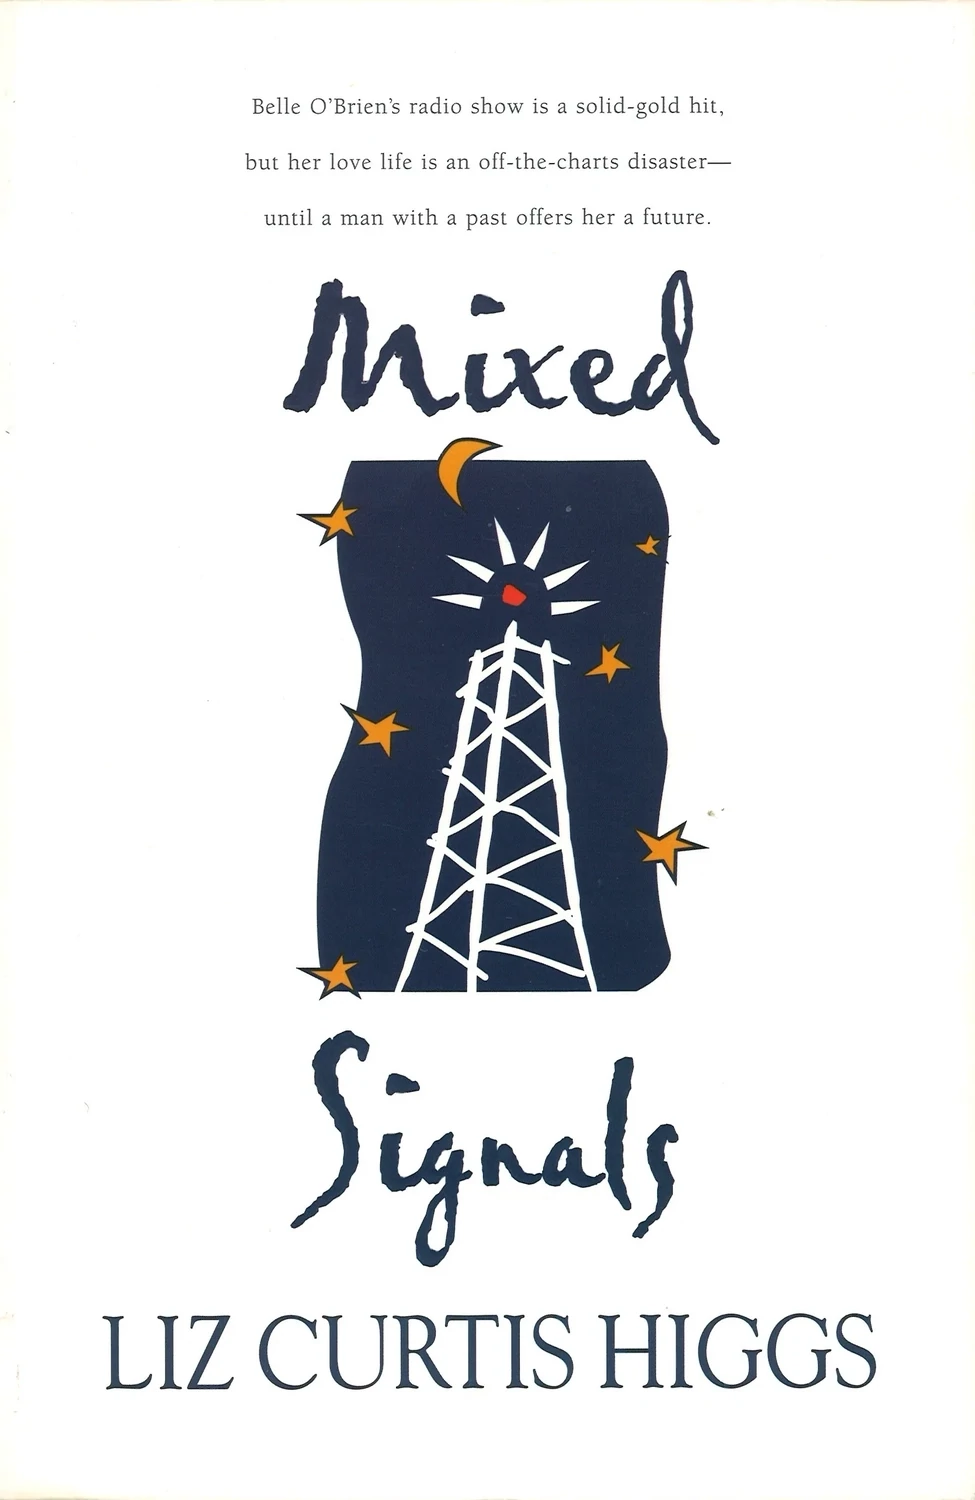 Mixed Signals by Liz Curtis Higgs